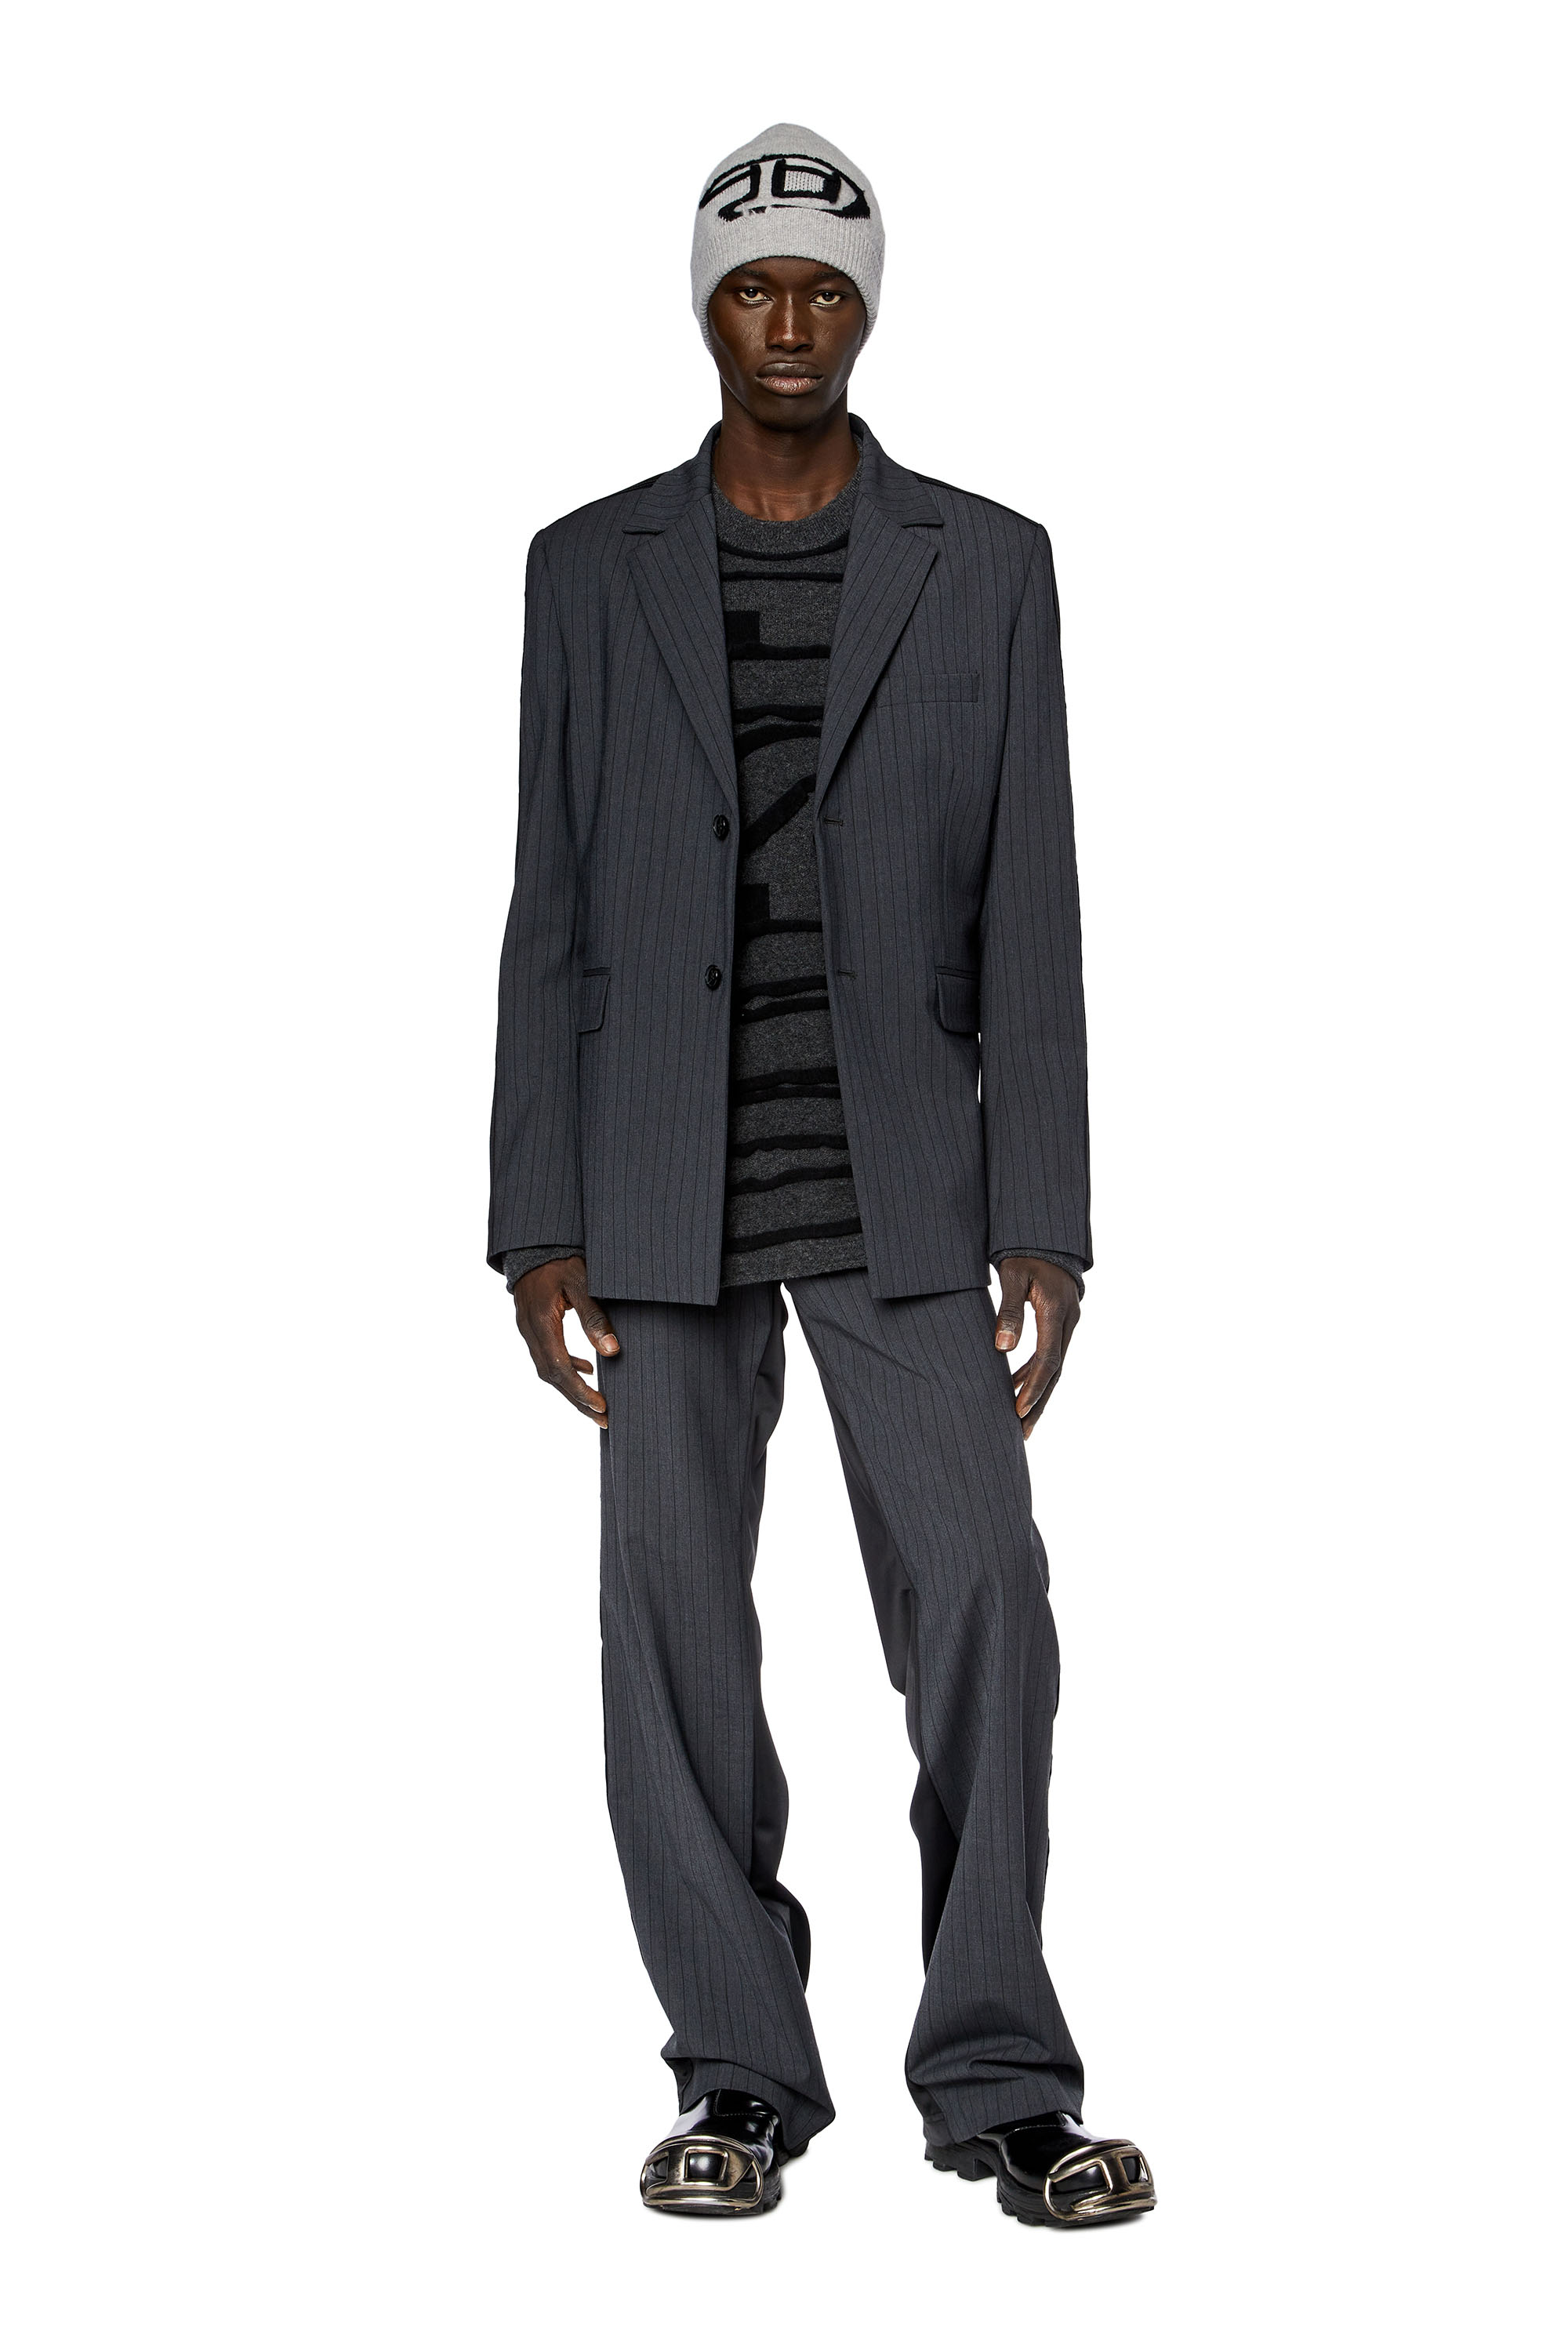 Diesel - J-WIRE, Man Blazer in pinstriped cool wool and jersey in Grey - Image 2